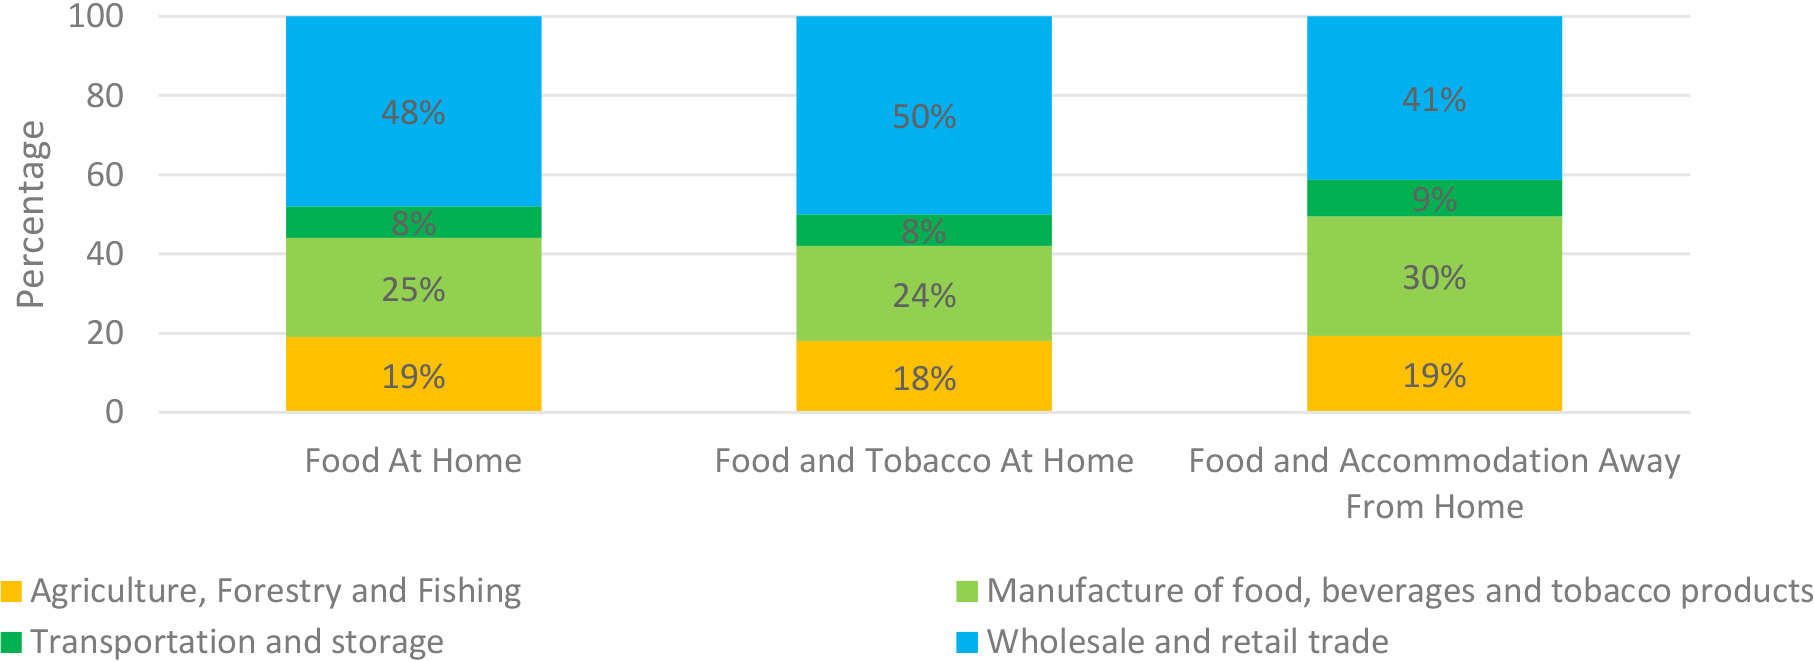 Food value measure by industry excluding accommodation and food service activities (2005–2015 average). Source: FAO. 2022. FAOSTAT: Industry and primary factors decomposition. In: FAO. Rome. Cited October 2022. https://www.fao.org/faostat/en/#data/GFDI.